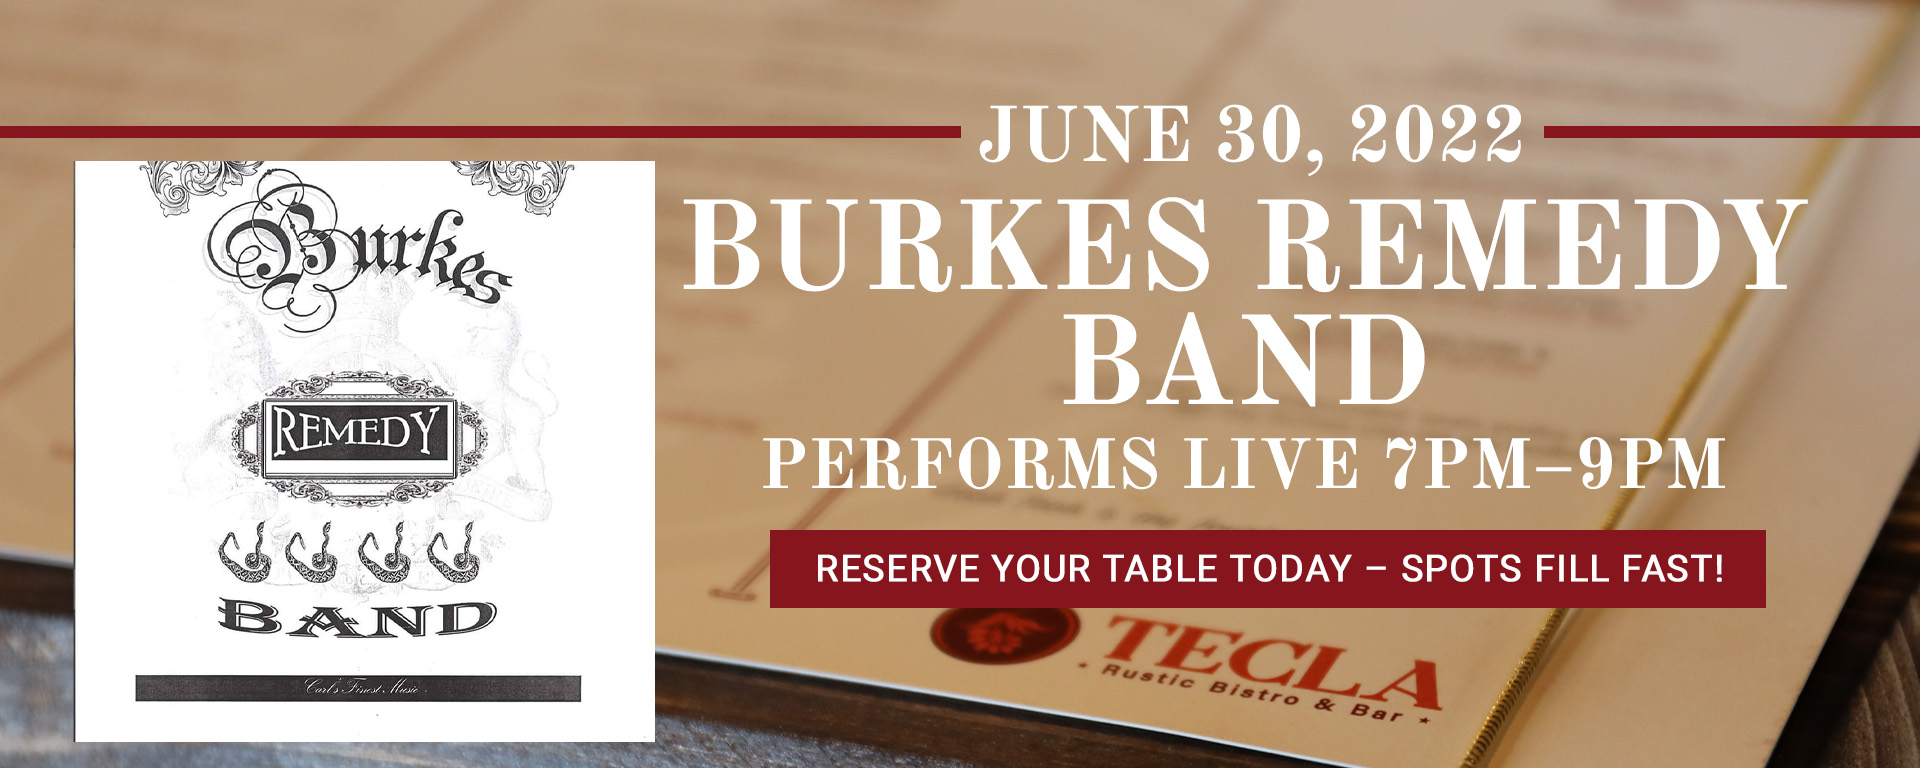 06/30/22 LIVE MUSIC FEATURING BURKES REMEDY BAND